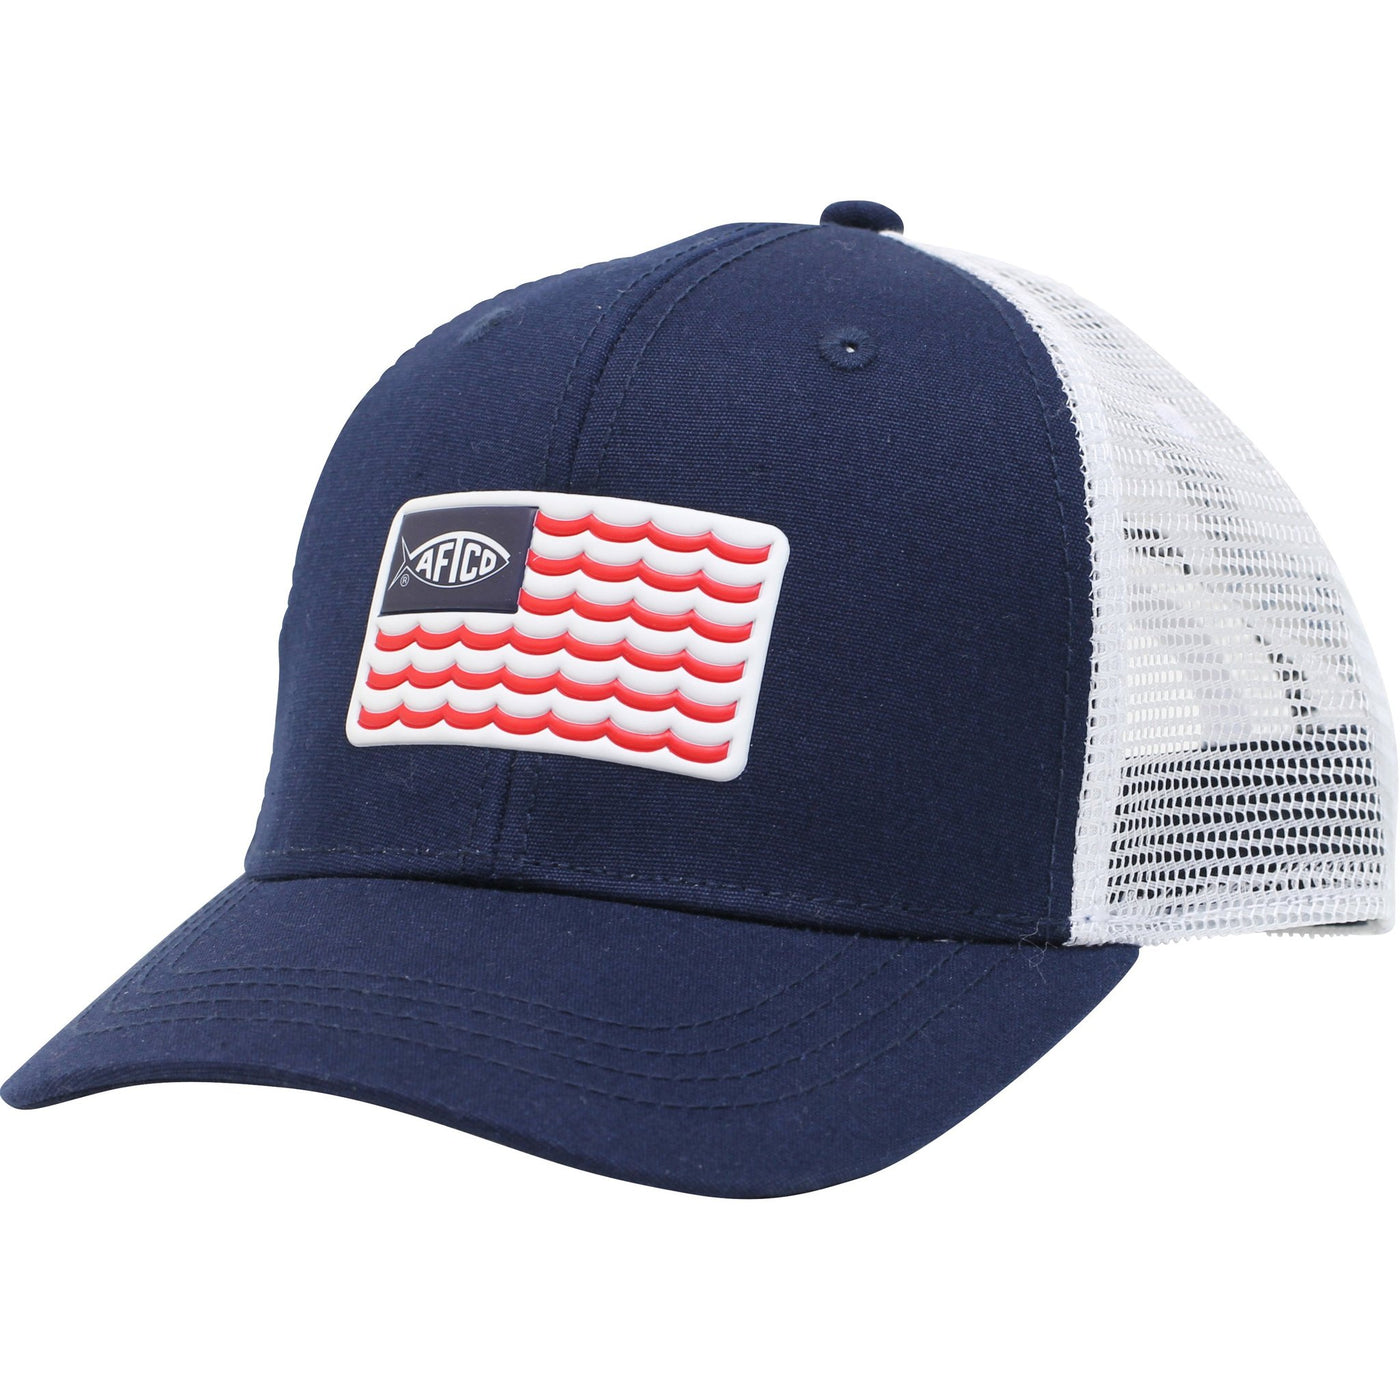 Aftco Canton Youth Trucker Cap-CHILDRENS CLOTHING-Navy-Kevin's Fine Outdoor Gear & Apparel